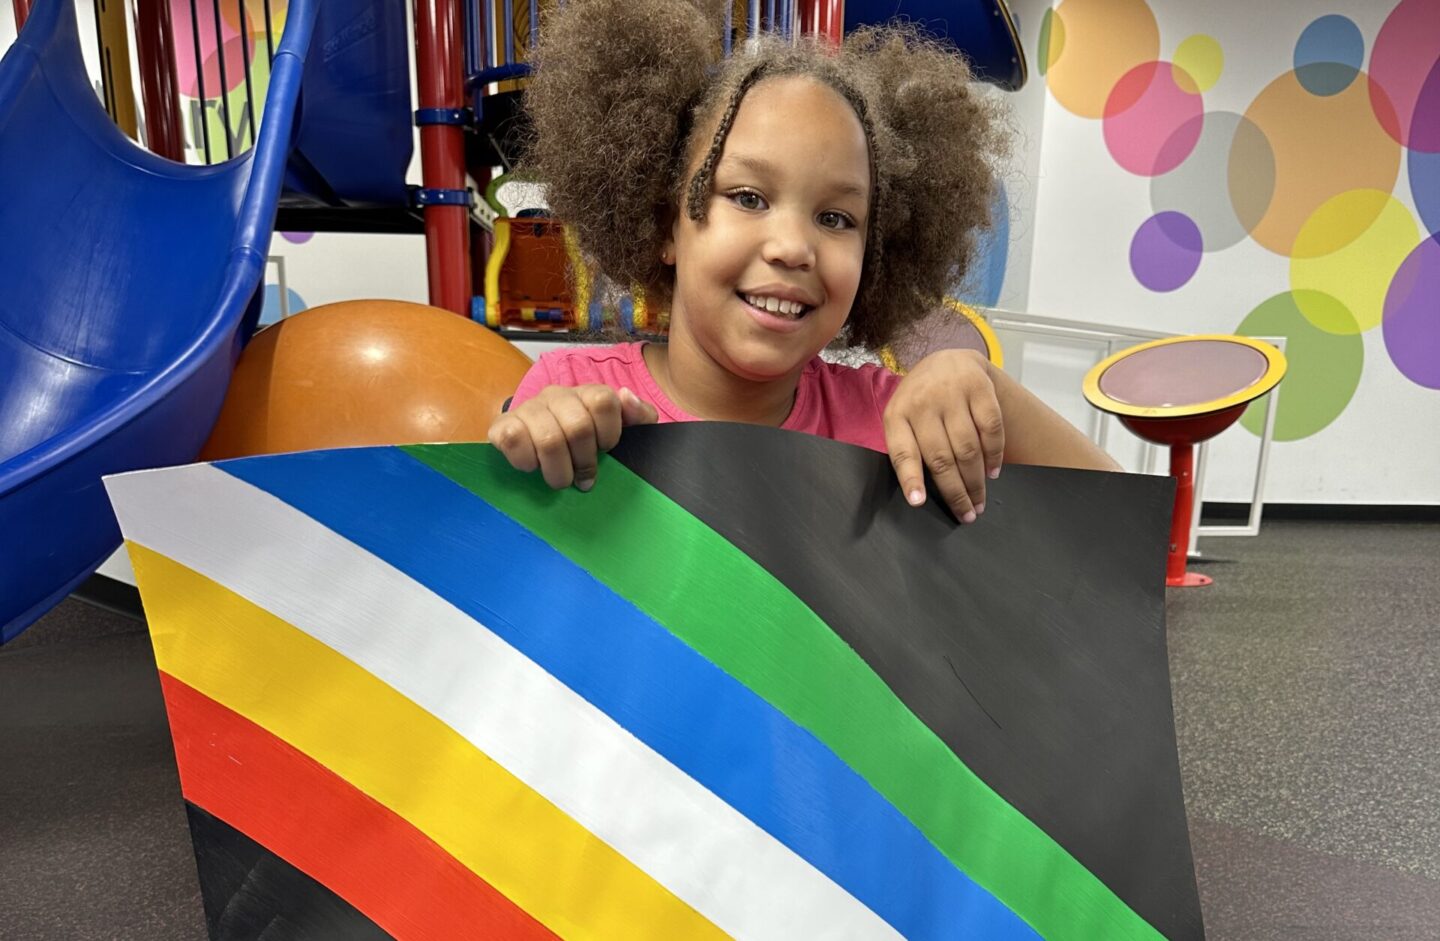 Patient with a disability holds a disability pride month flag during one of her therapy sessions